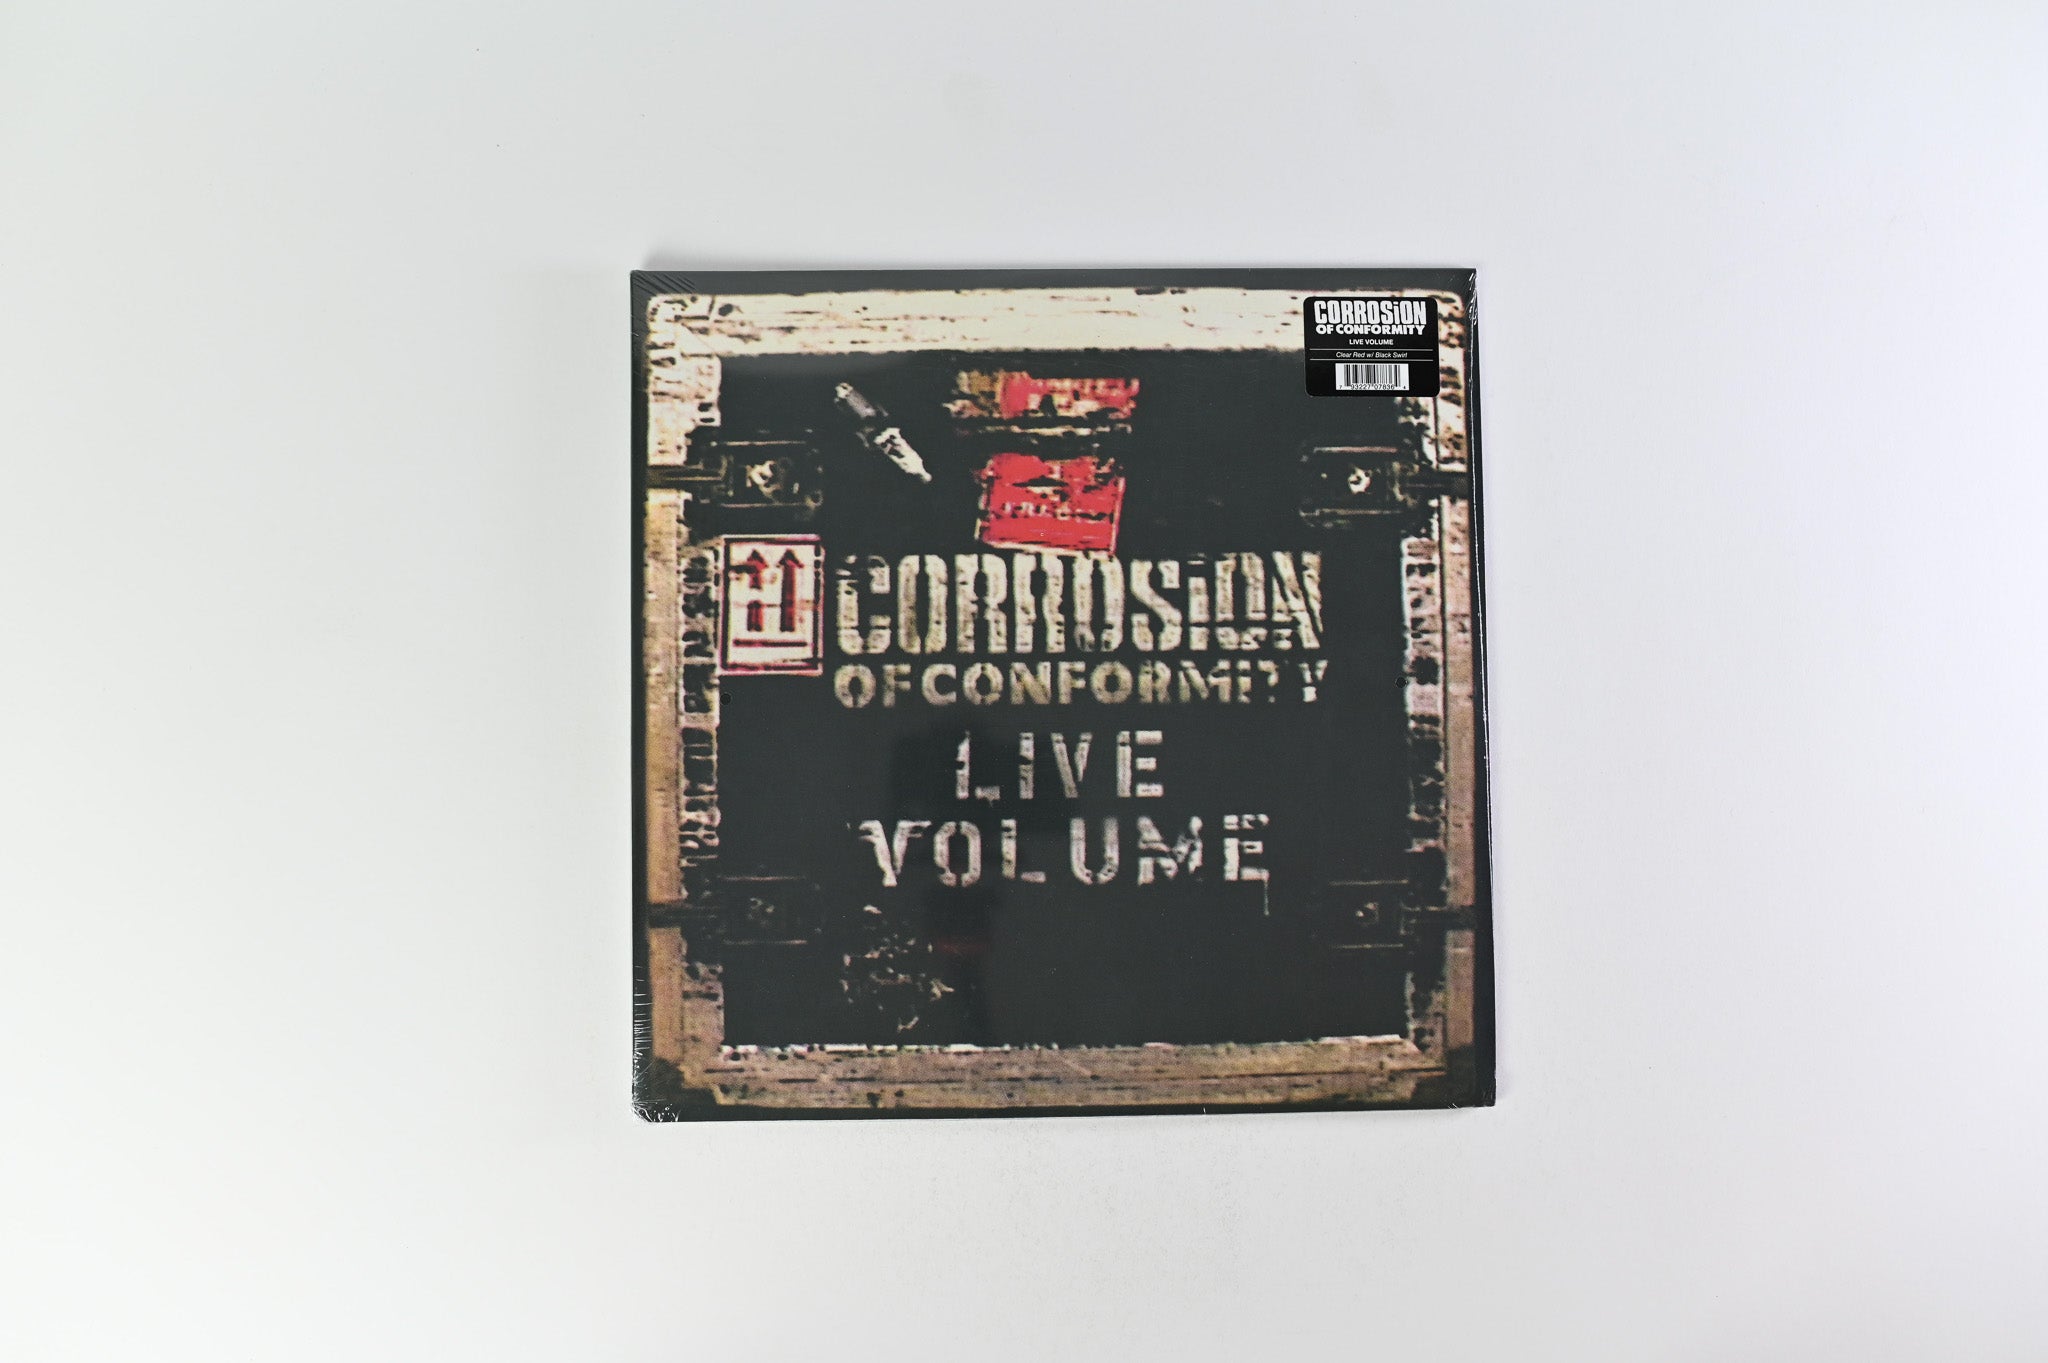 Corrosion Of Conformity - Live Volume on BMG Ltd Clear Red w/ Black Swirl Reissue Sealed